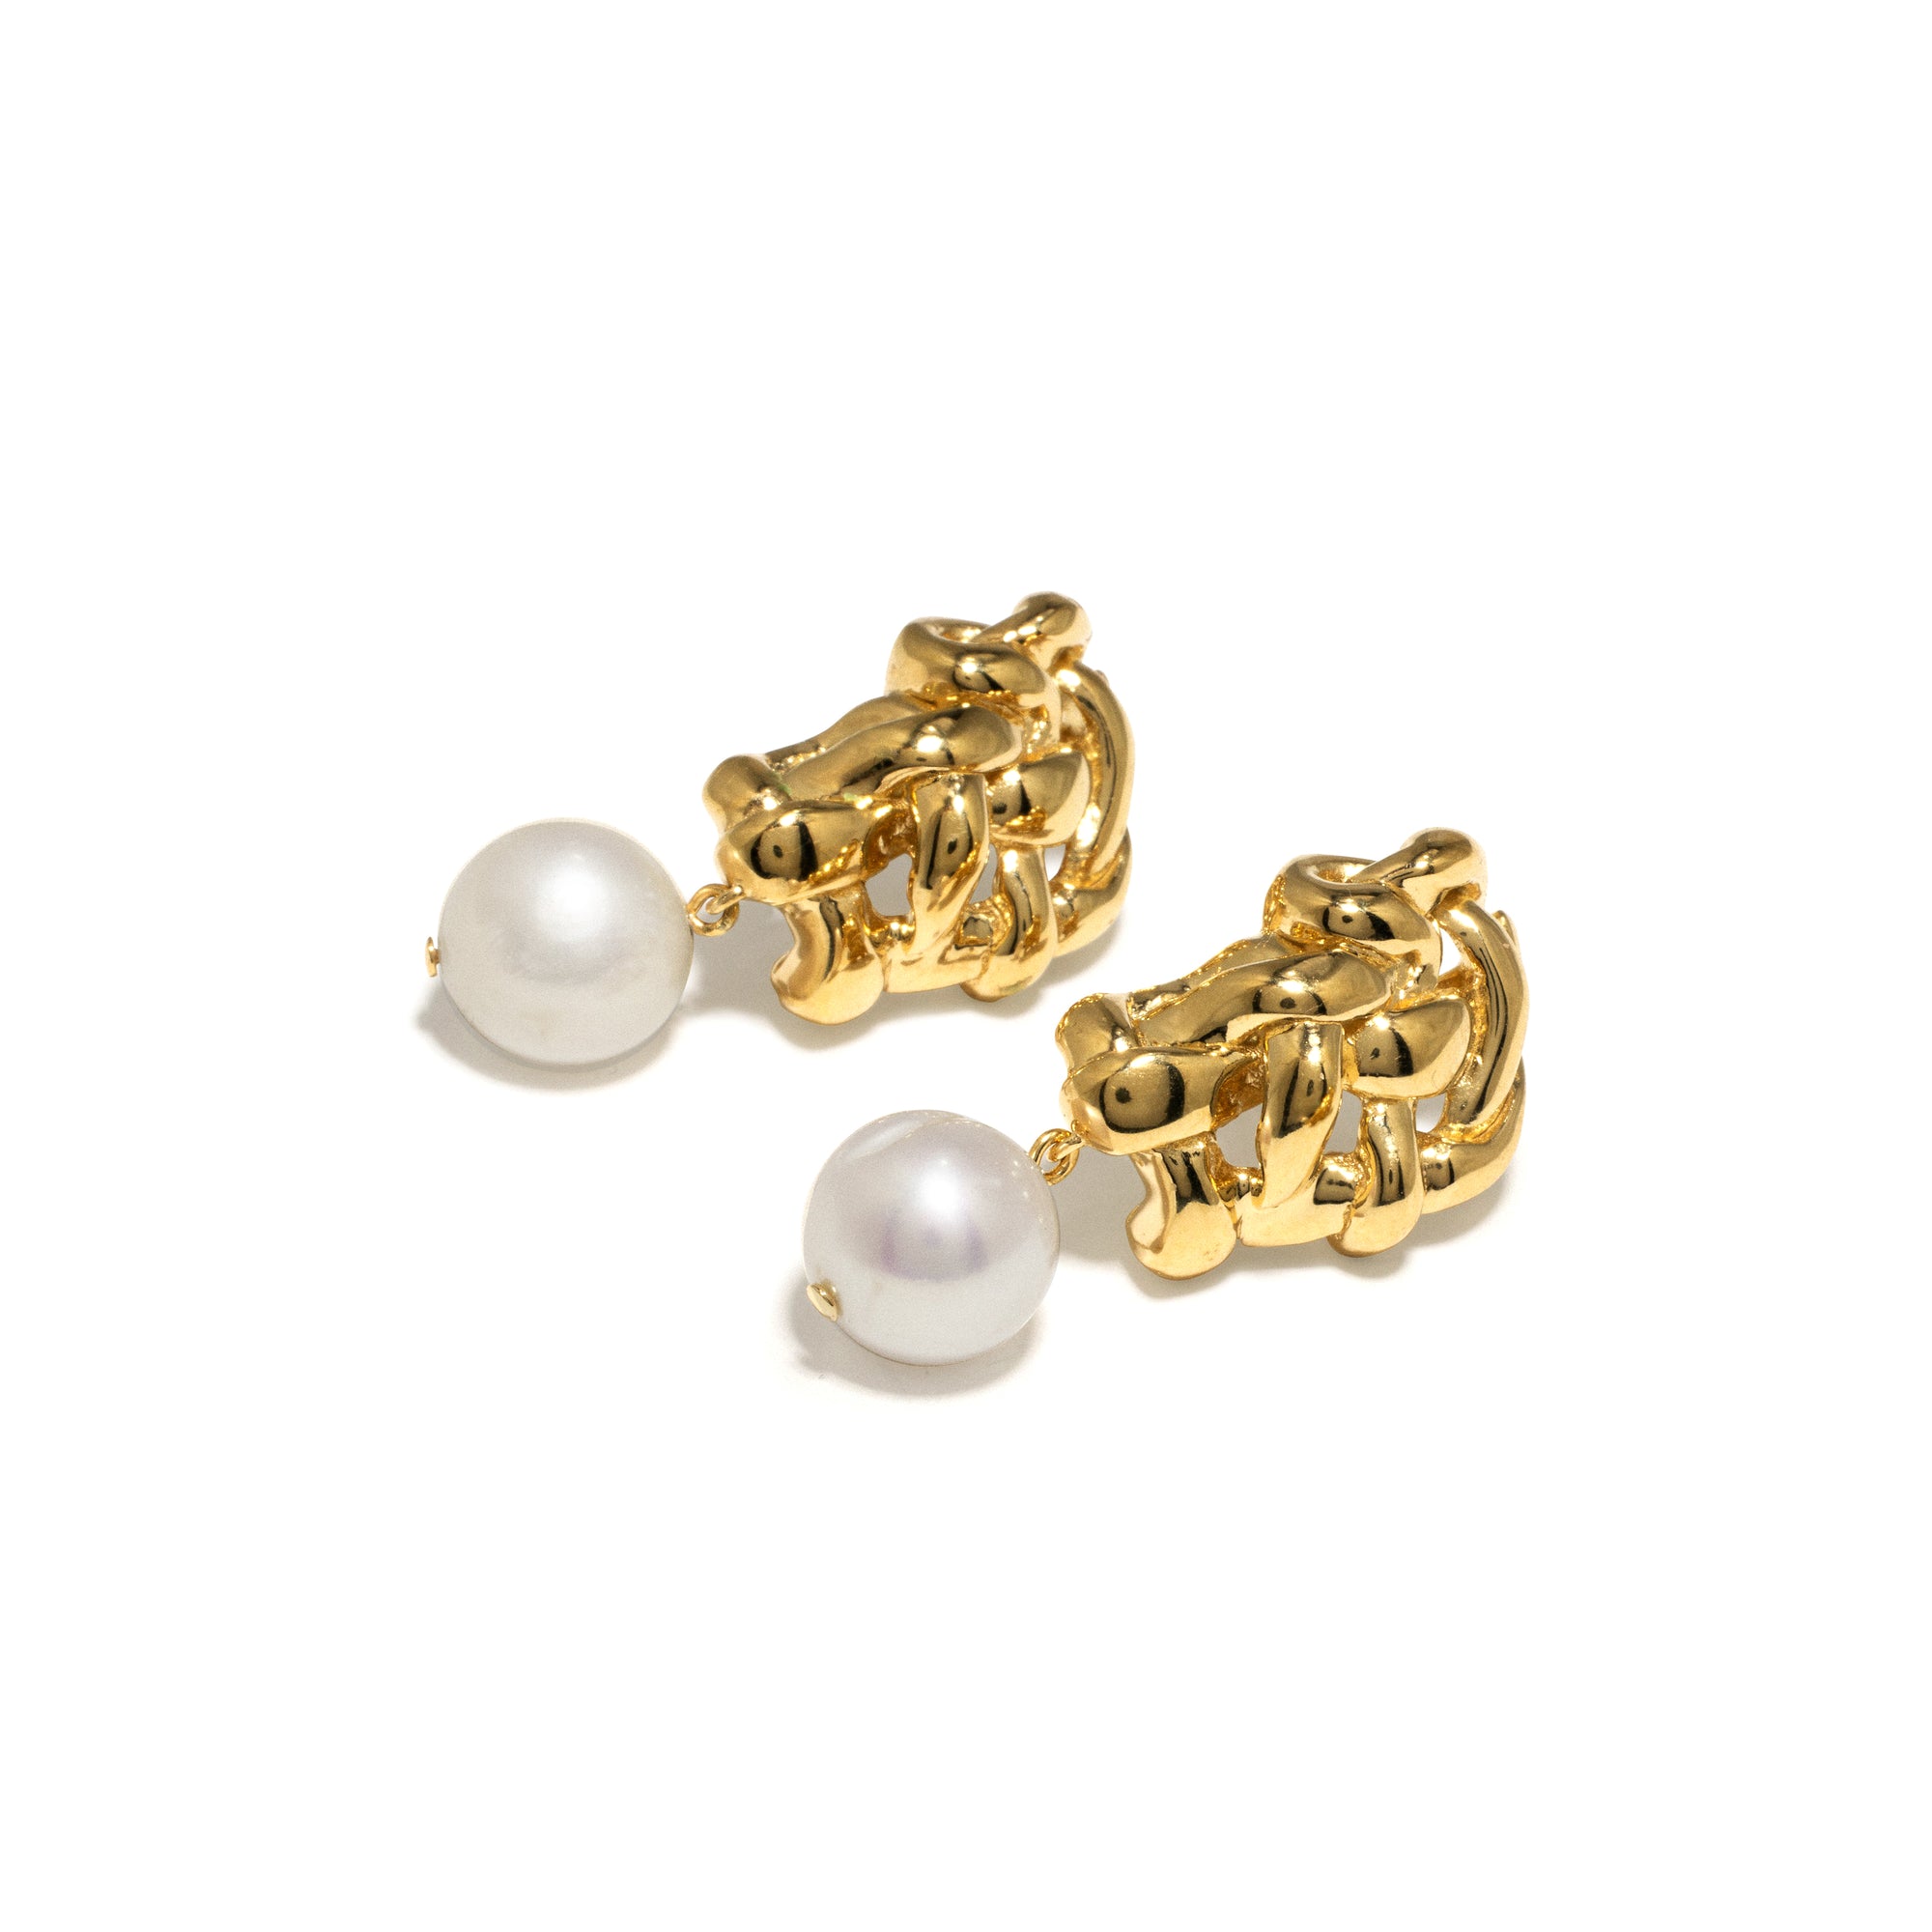 Completedworks - Women's A Shimmer of Possibility Earrings - (Pearl/Gold Vermeil) view 2